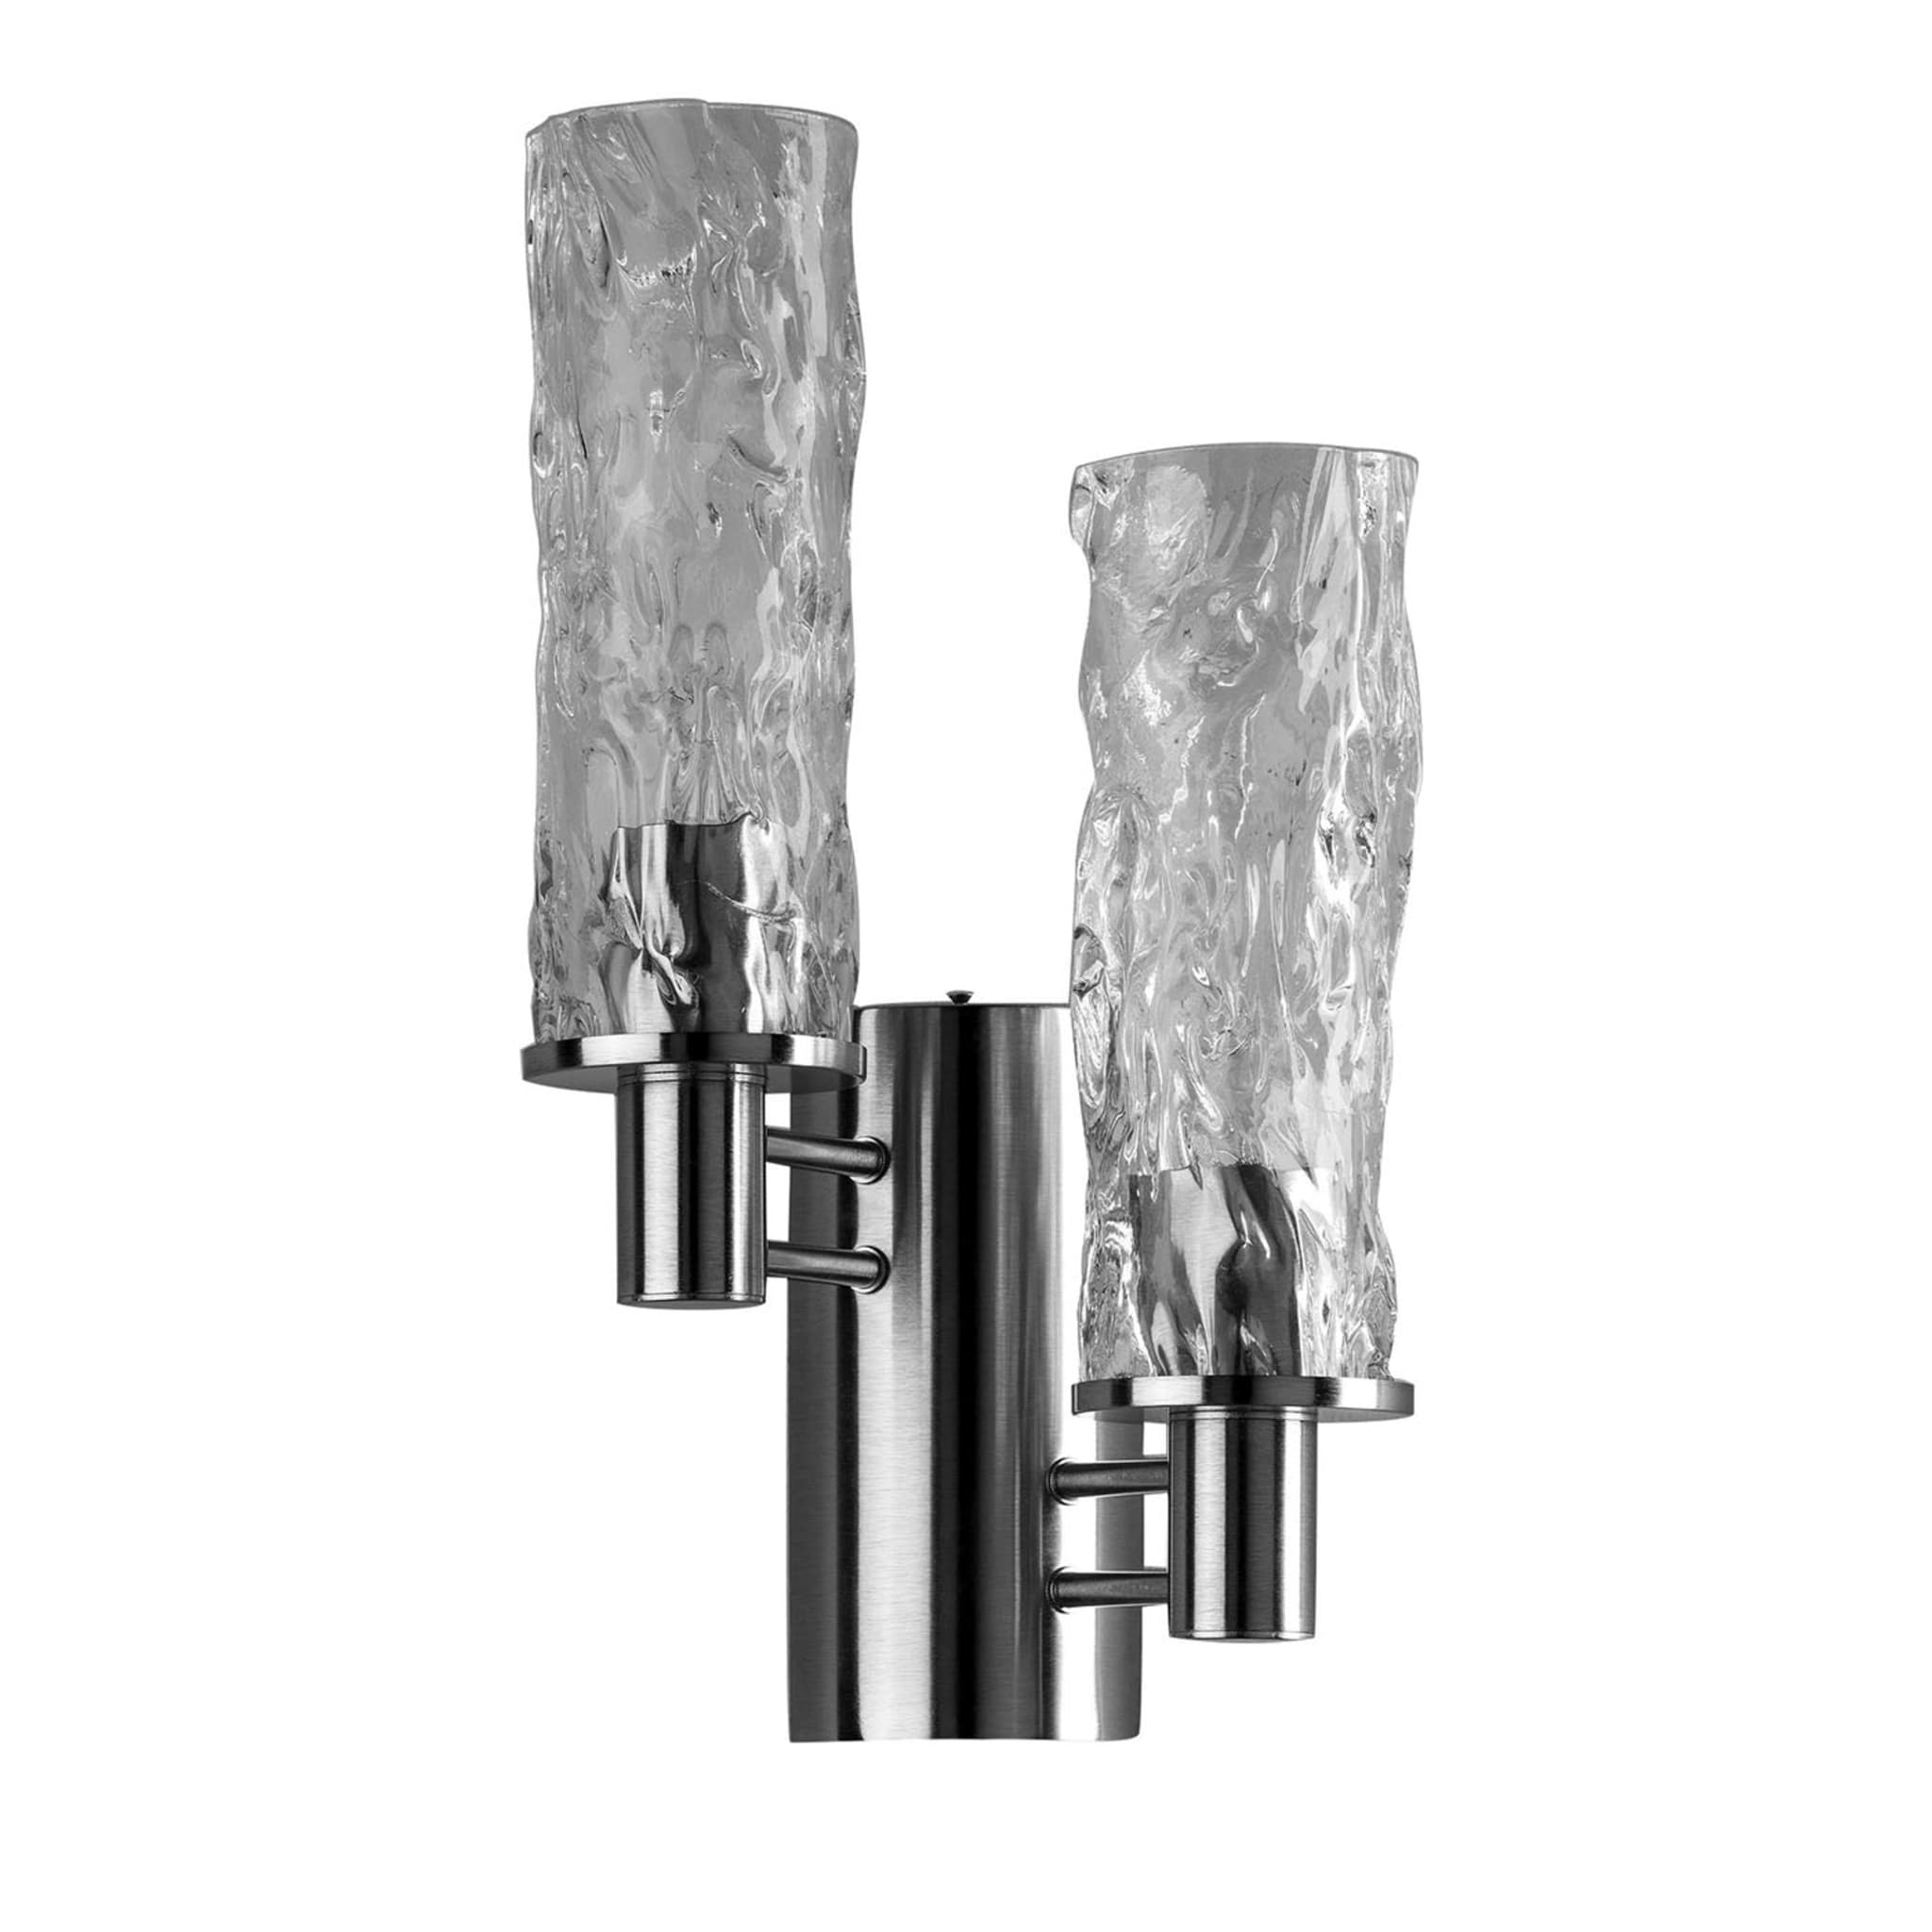 Wall Sconce With Two Blown Glass Elements - Alternative view 1